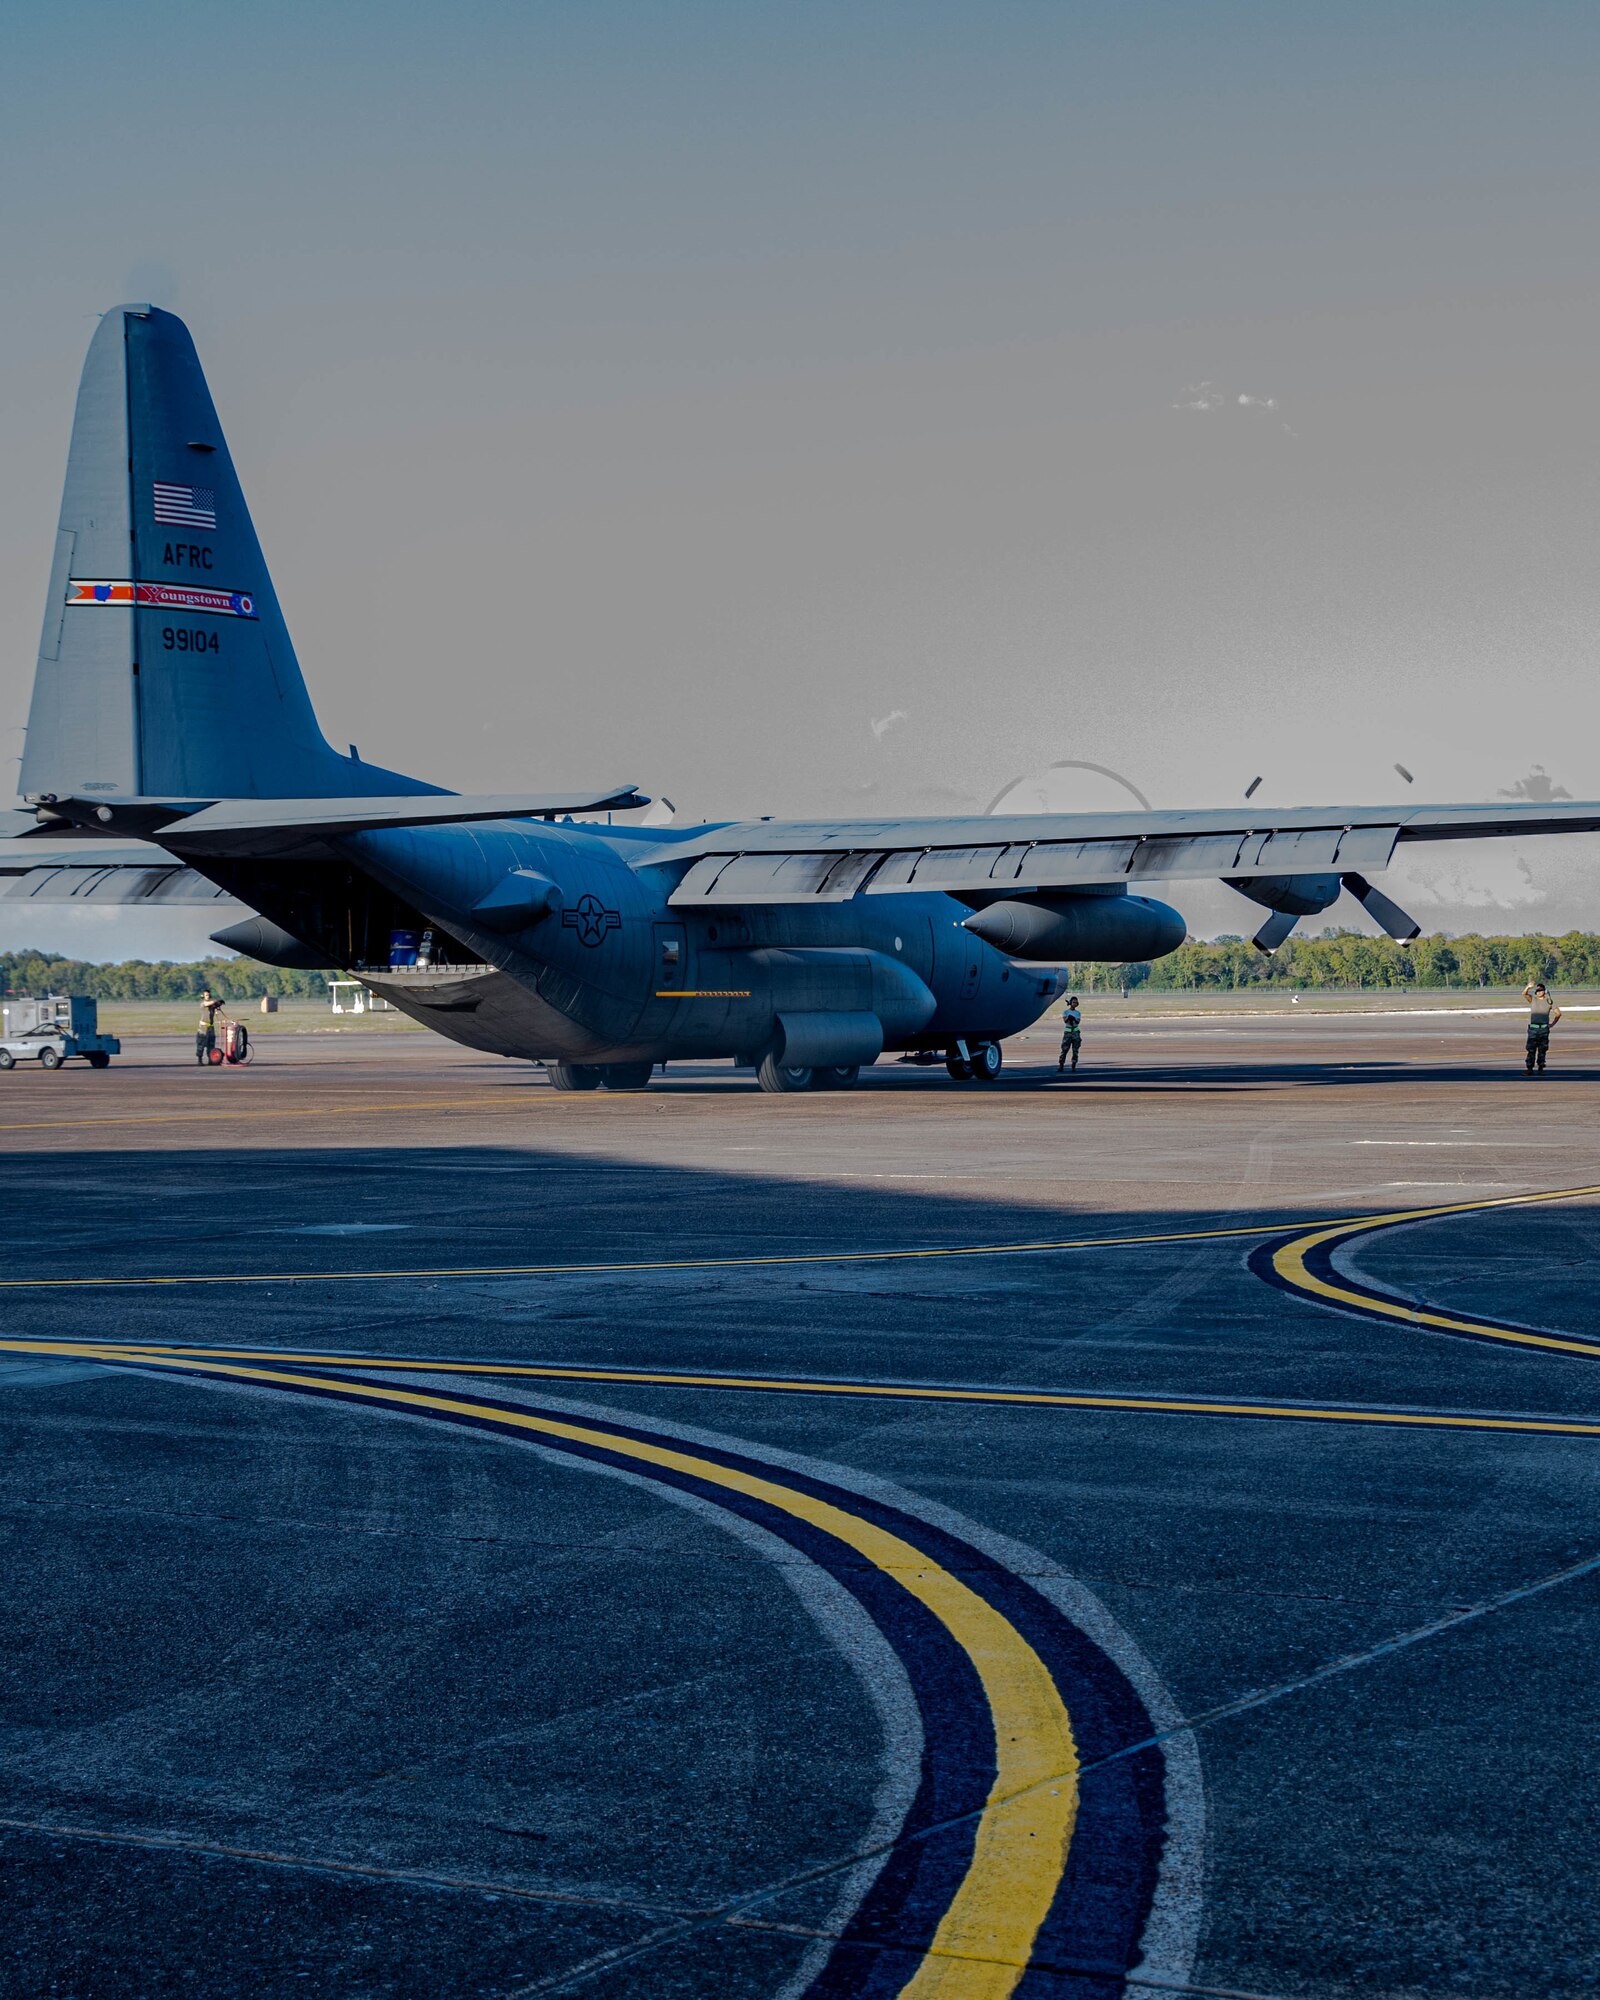 A U.S. Air Force Reserve C-130H Hercules aircraft assigned to the 910th Airlift Wing, based at Youngstown Air Reserve Station, Ohio, and equipped with a Modular Aerial Spray System, starts engines prior to taking off from Barksdale Air Force Base, Louisiana, Oct. 22, 2020.